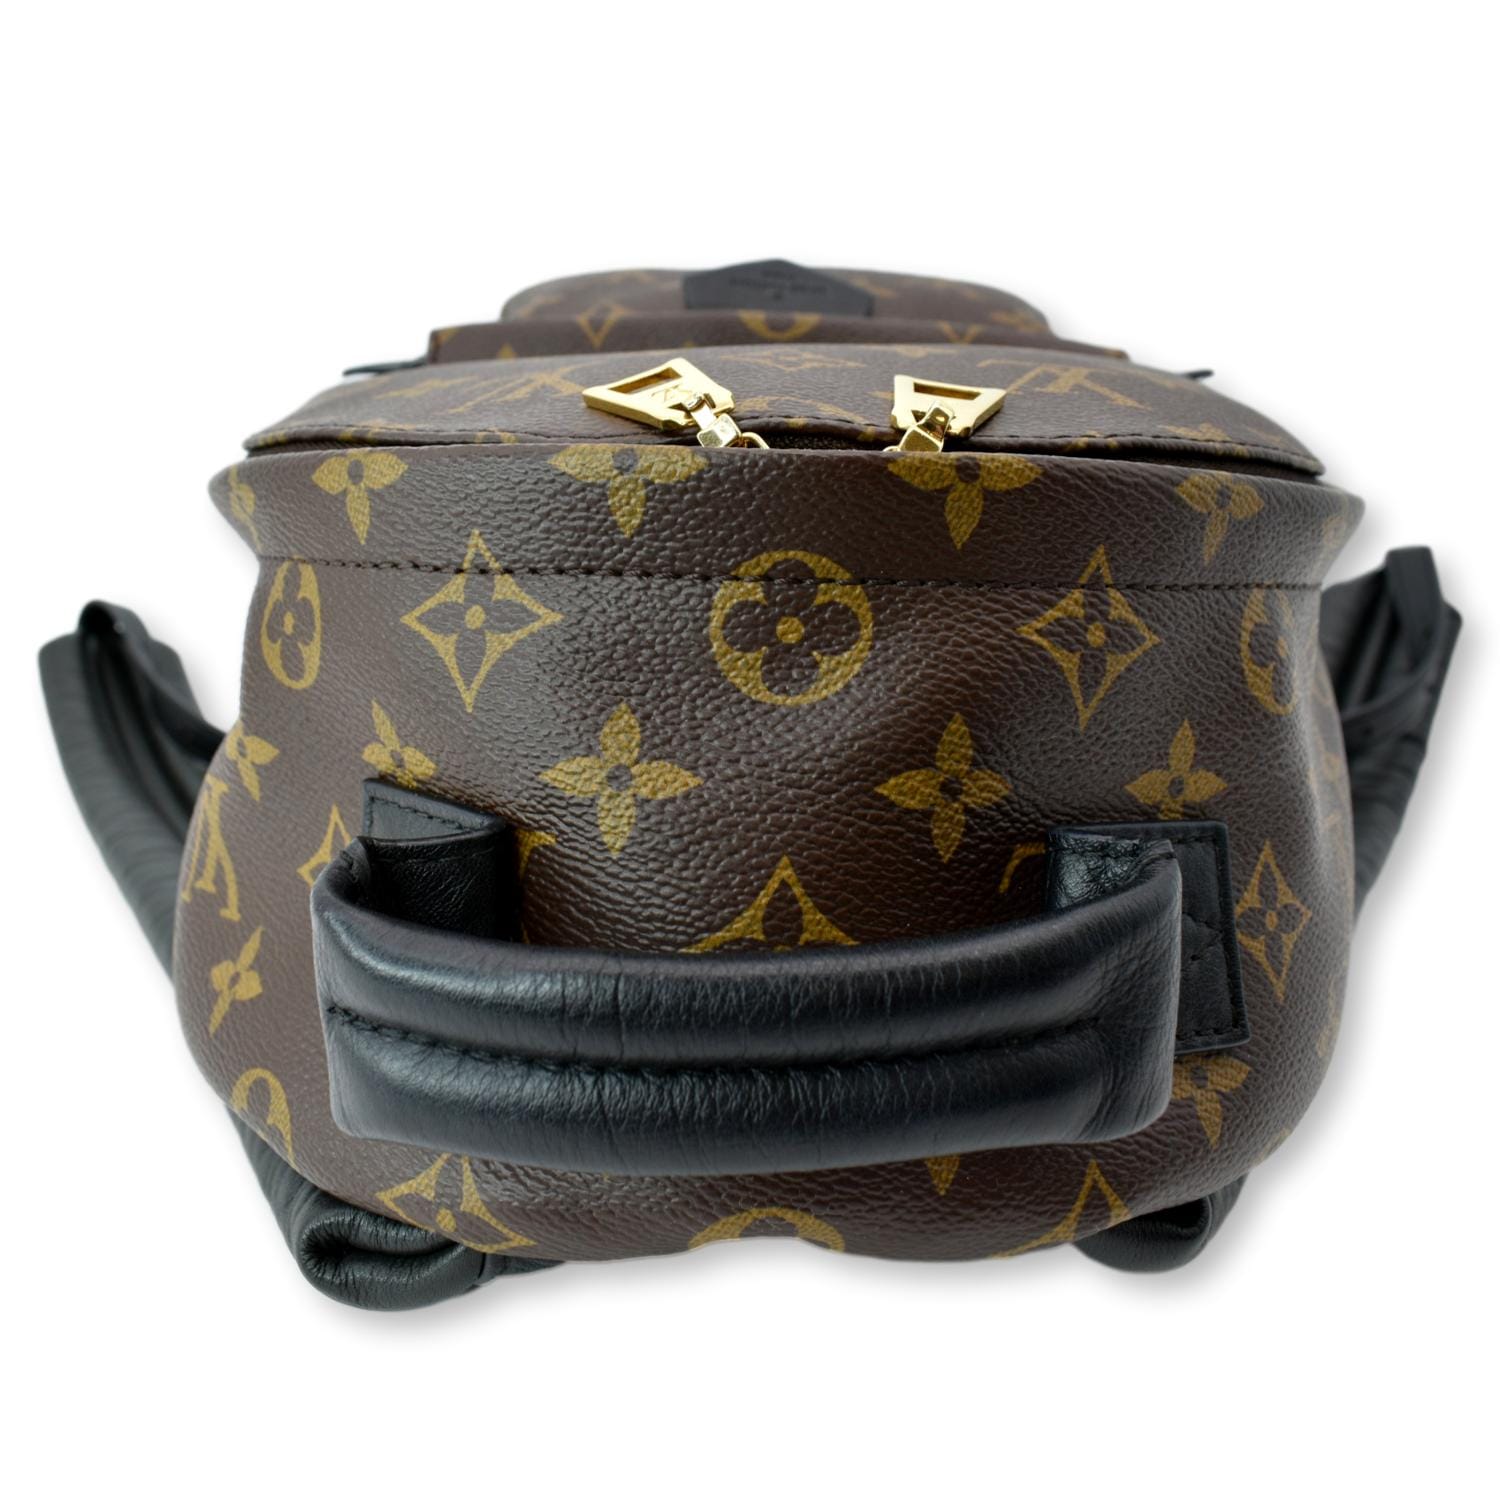 Louis Vuitton Palm Springs PM Backpack in Monogram Noir - SOLD